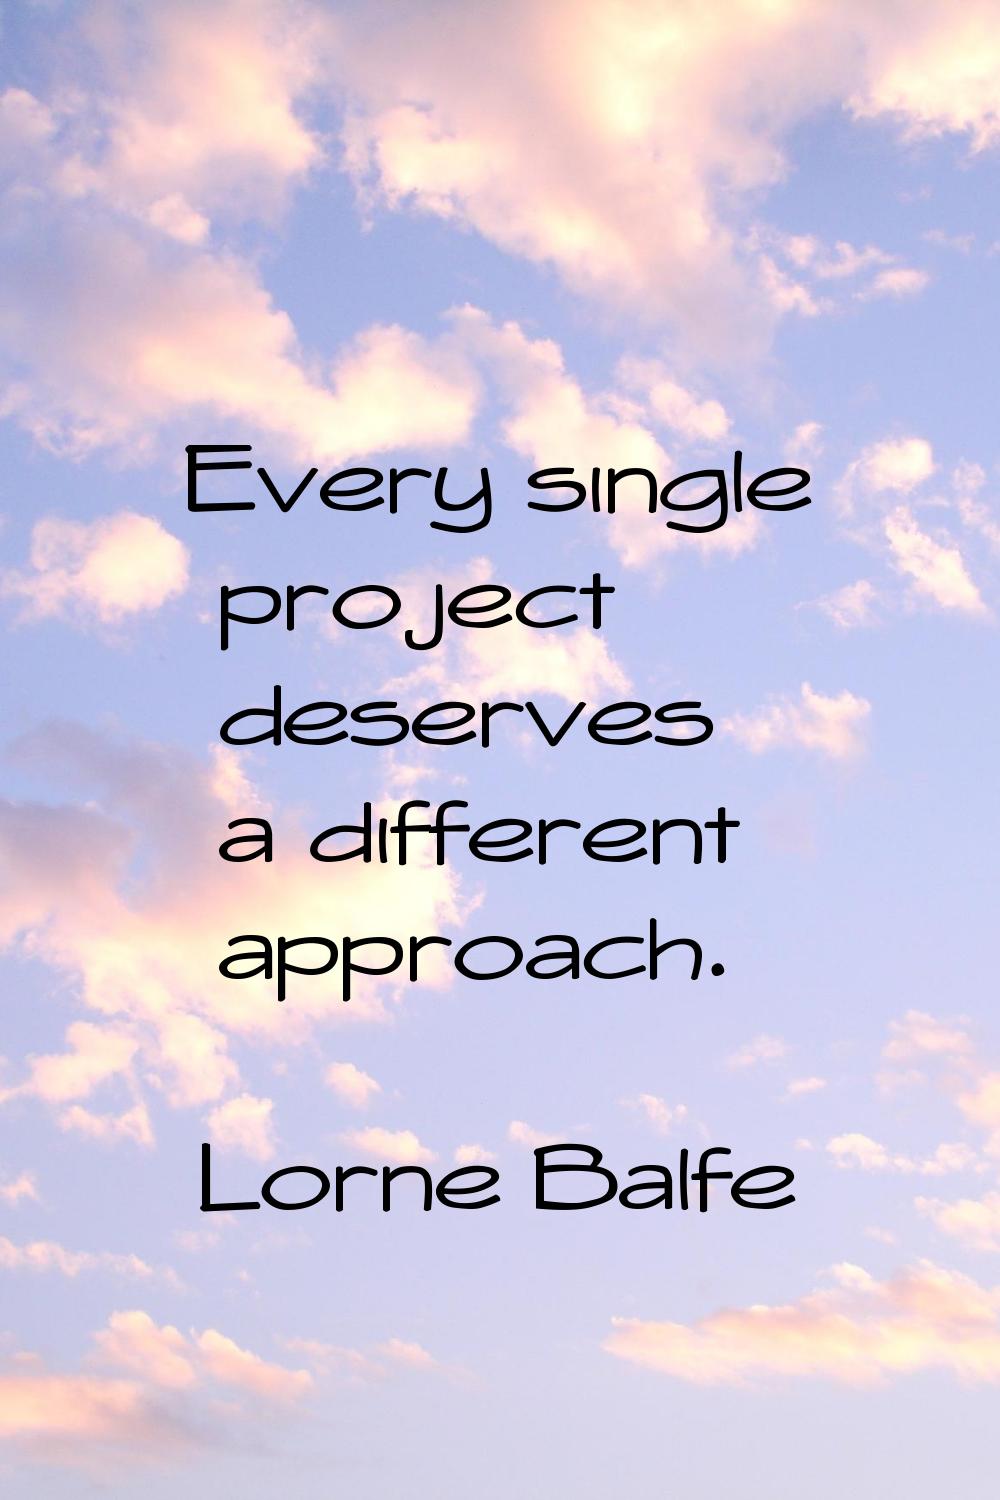 Every single project deserves a different approach.